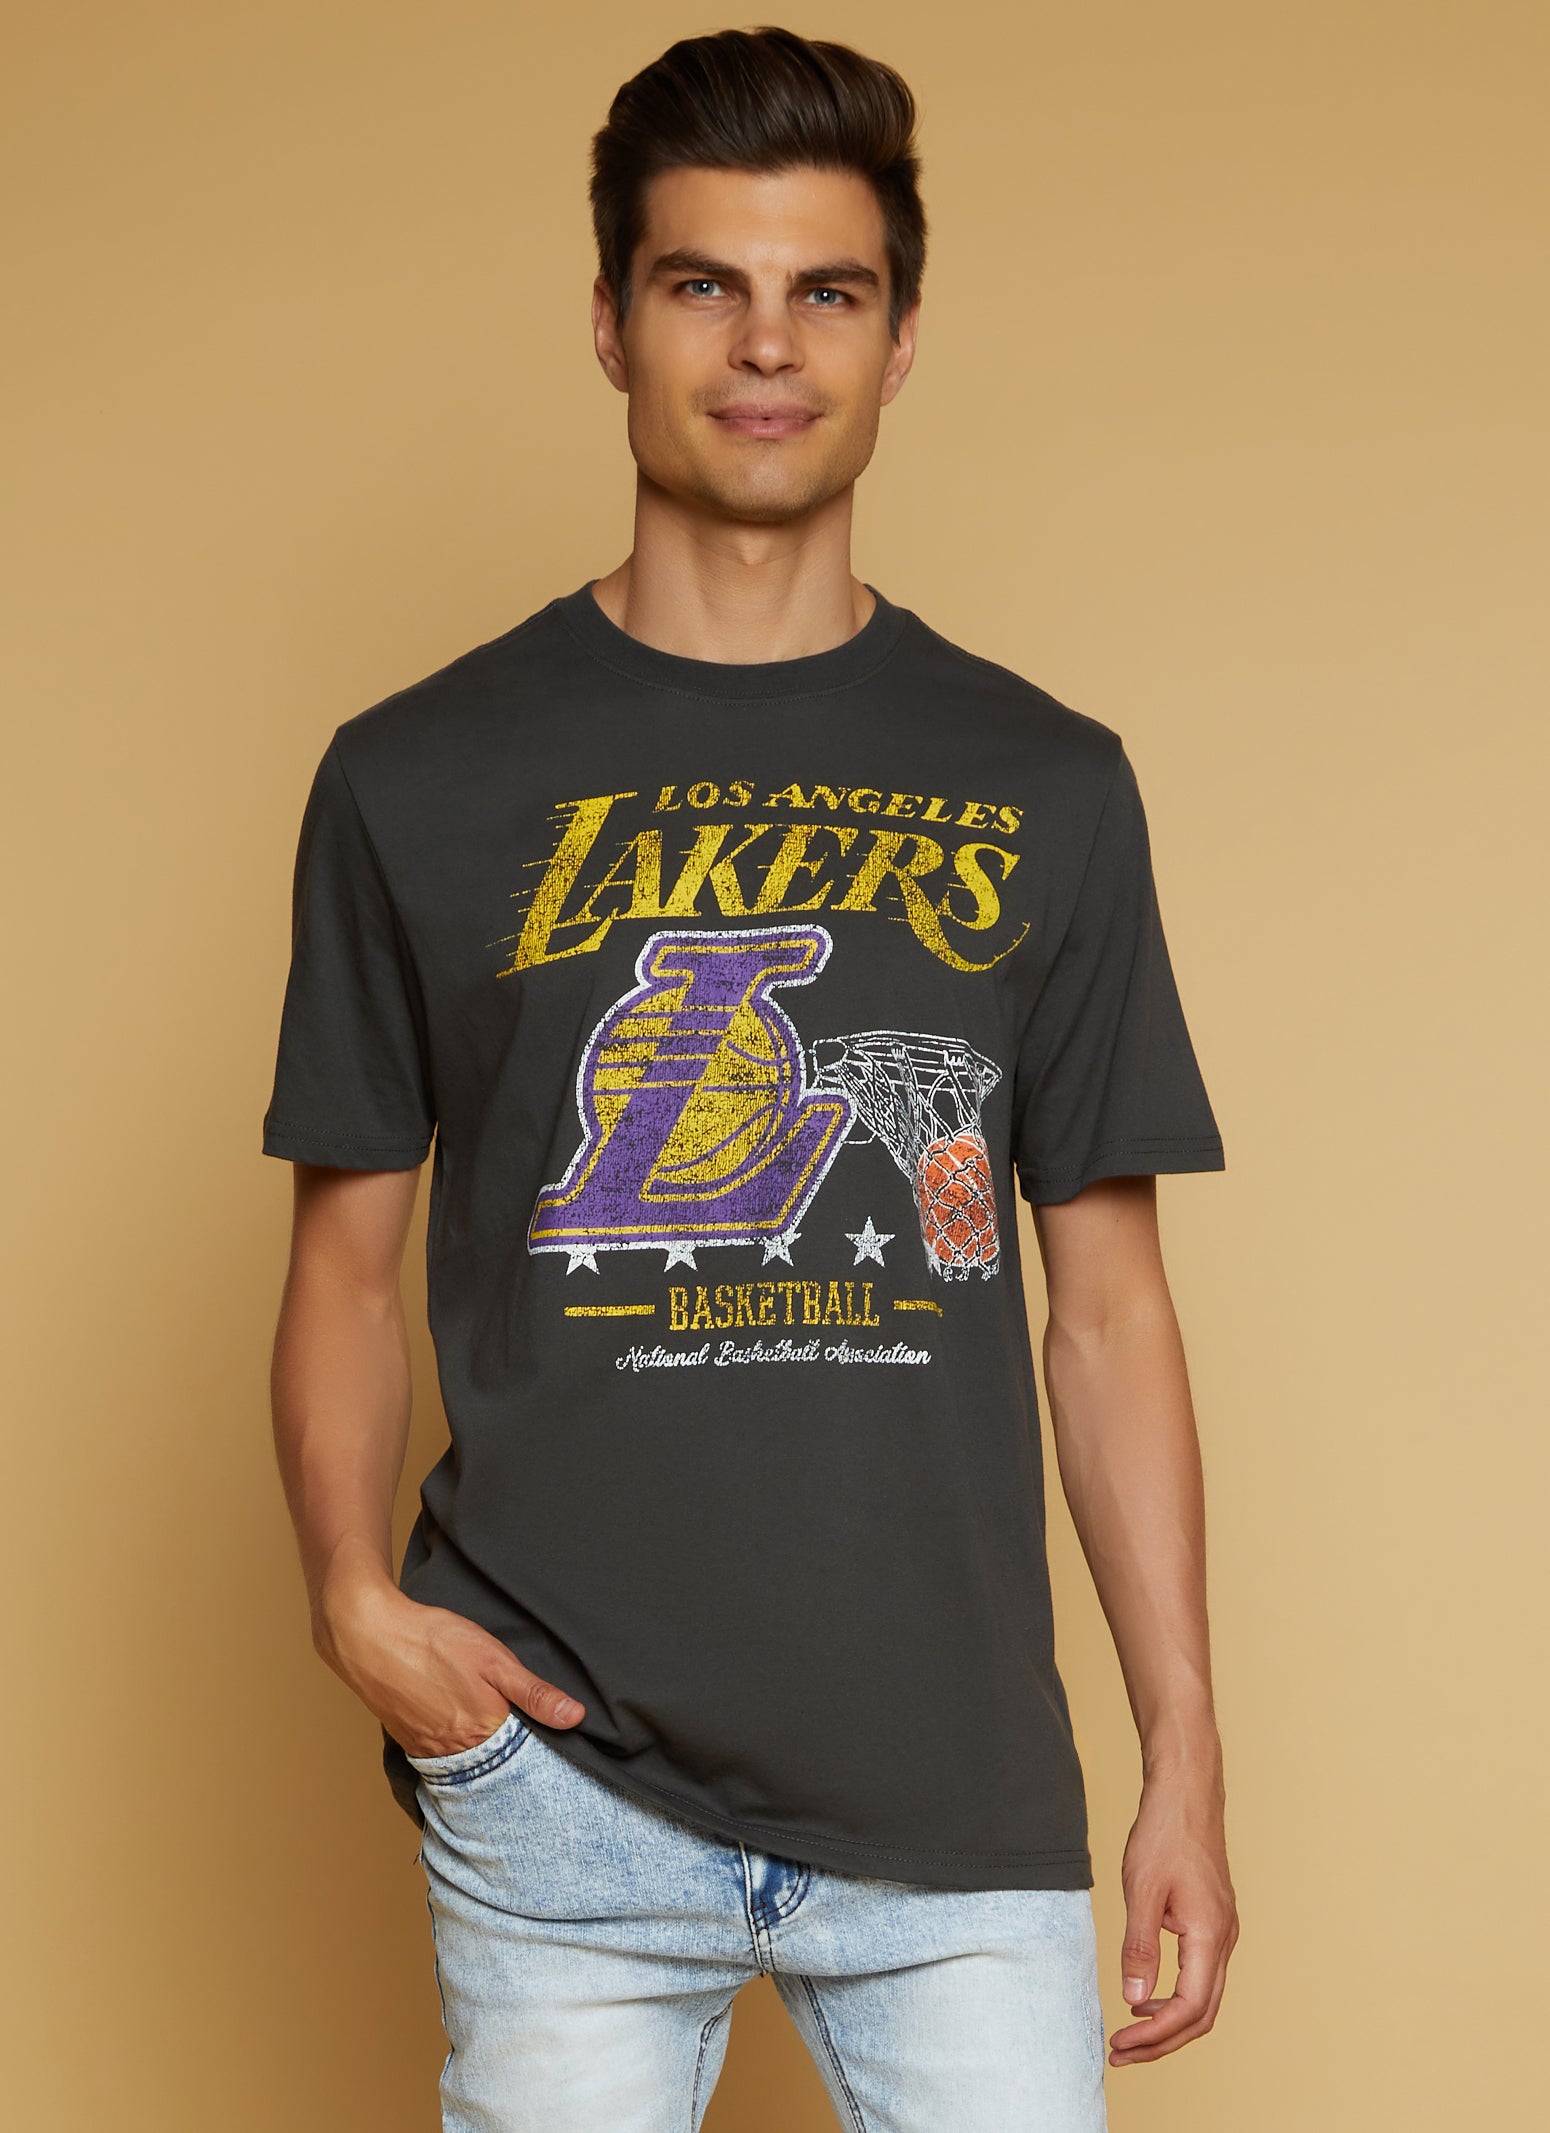 Womens Mens NBA Los Angeles Lakers Short Sleeve Graphic Tee, Black, Size M